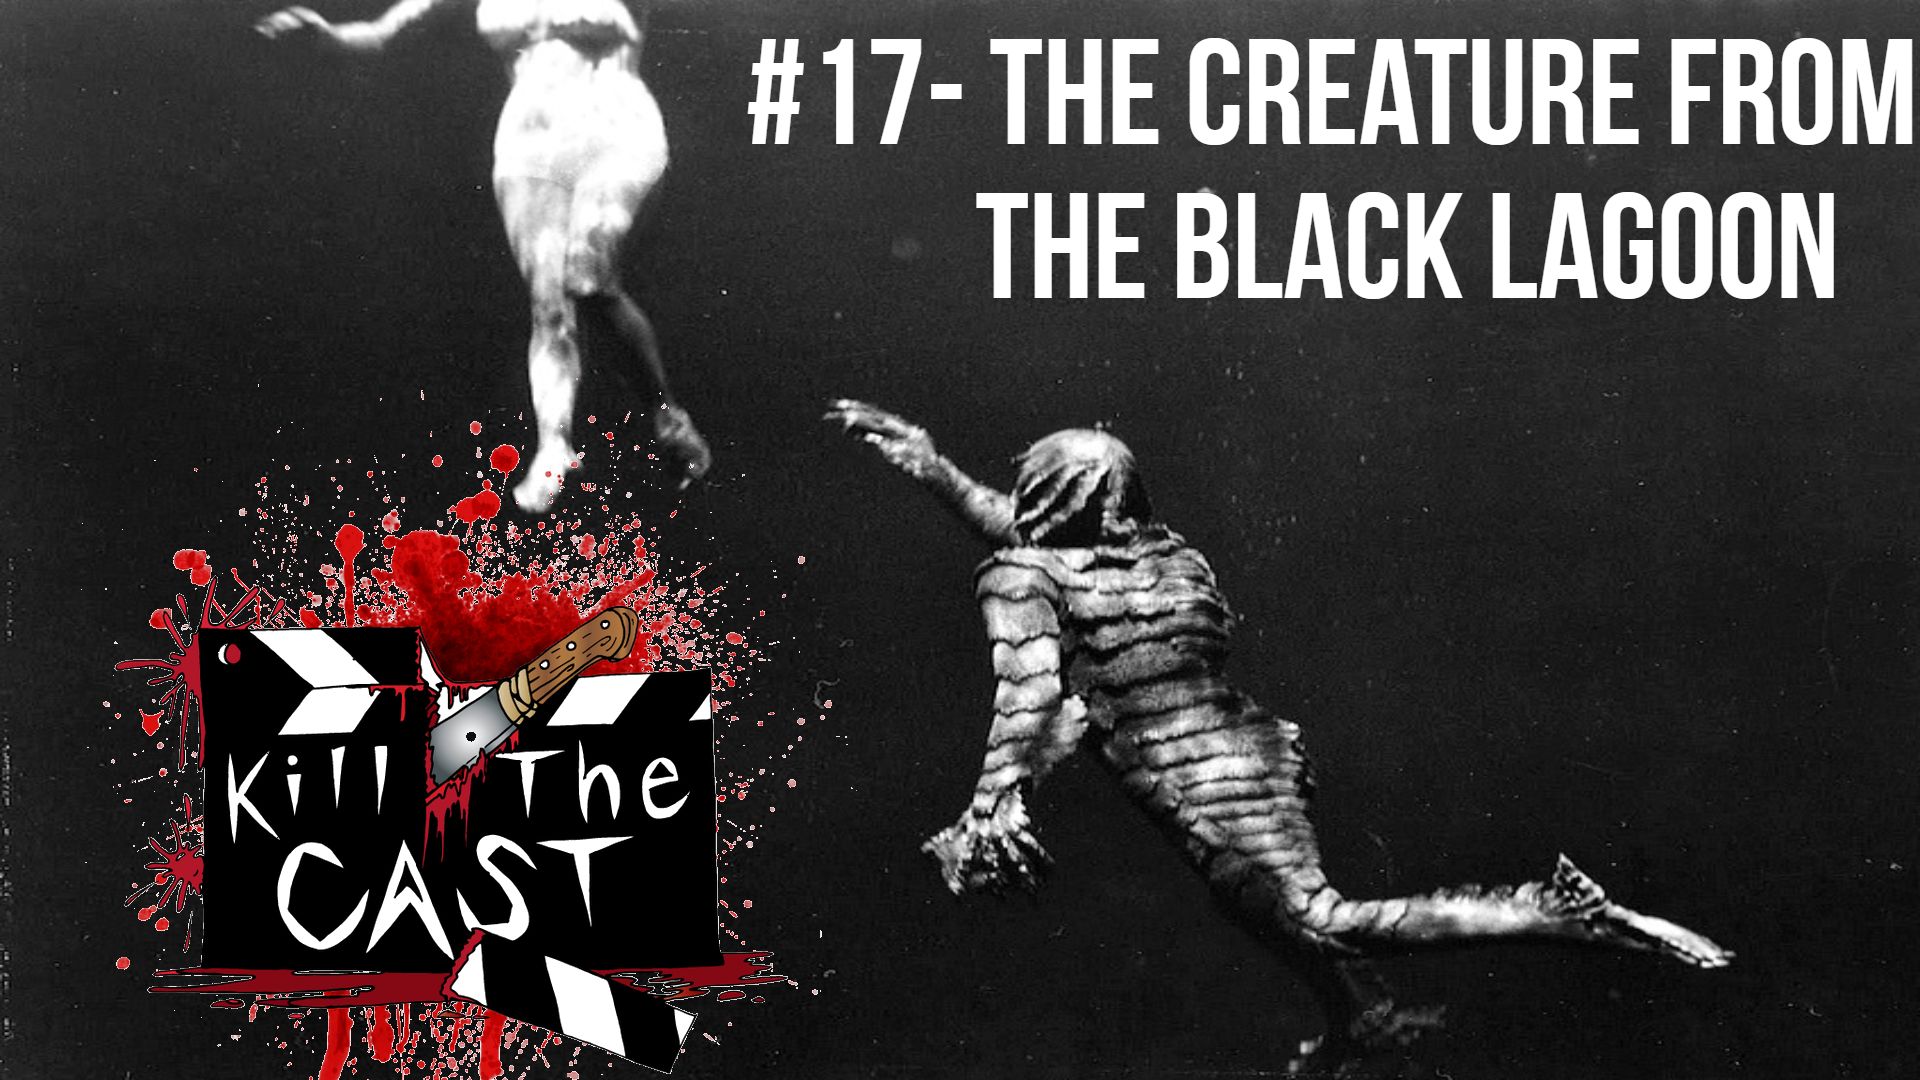 #17- The creature From the Black Lagoon (1954)